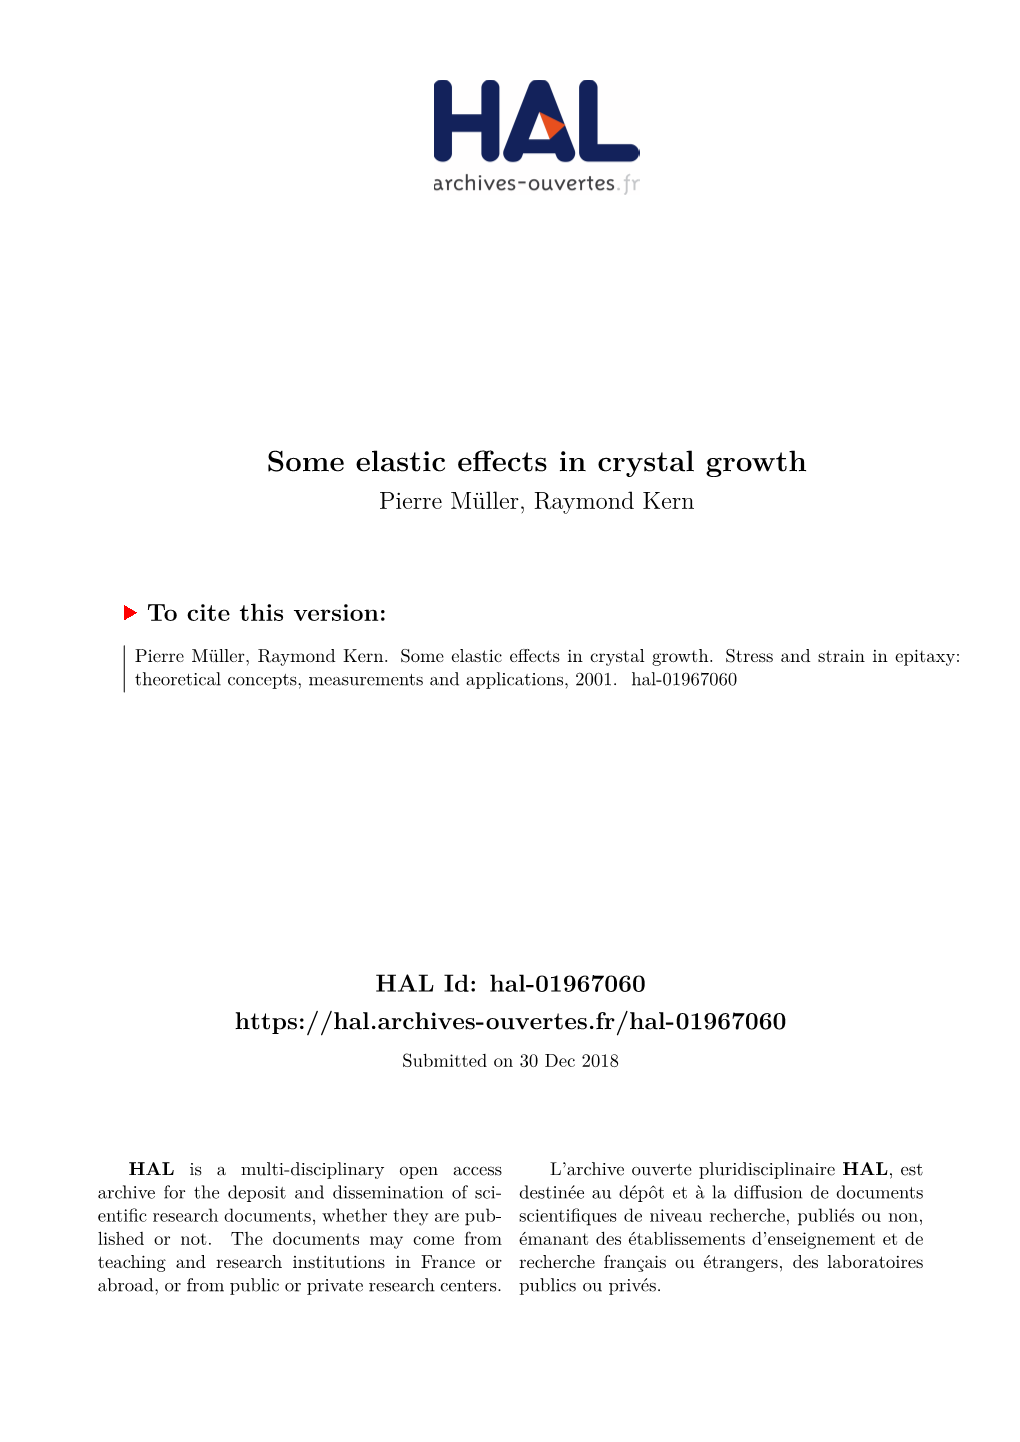 Some Elastic Effects in Crystal Growth Pierre Müller, Raymond Kern